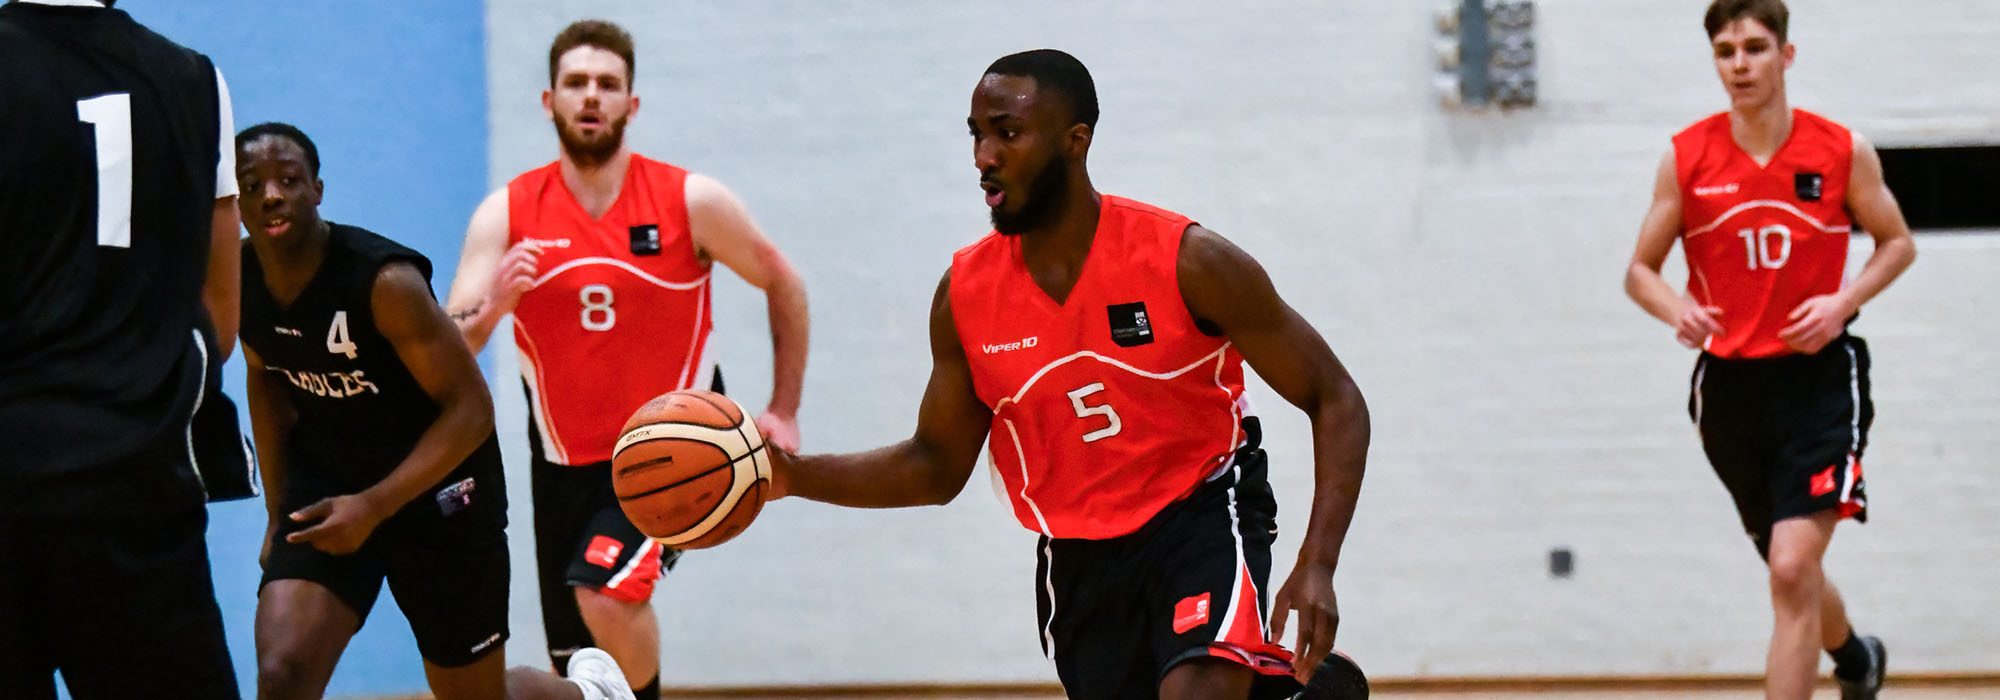 male basketball player dribbling across the court. His team mates are running behind him. They all wear red Staffs team basketball jerseys.